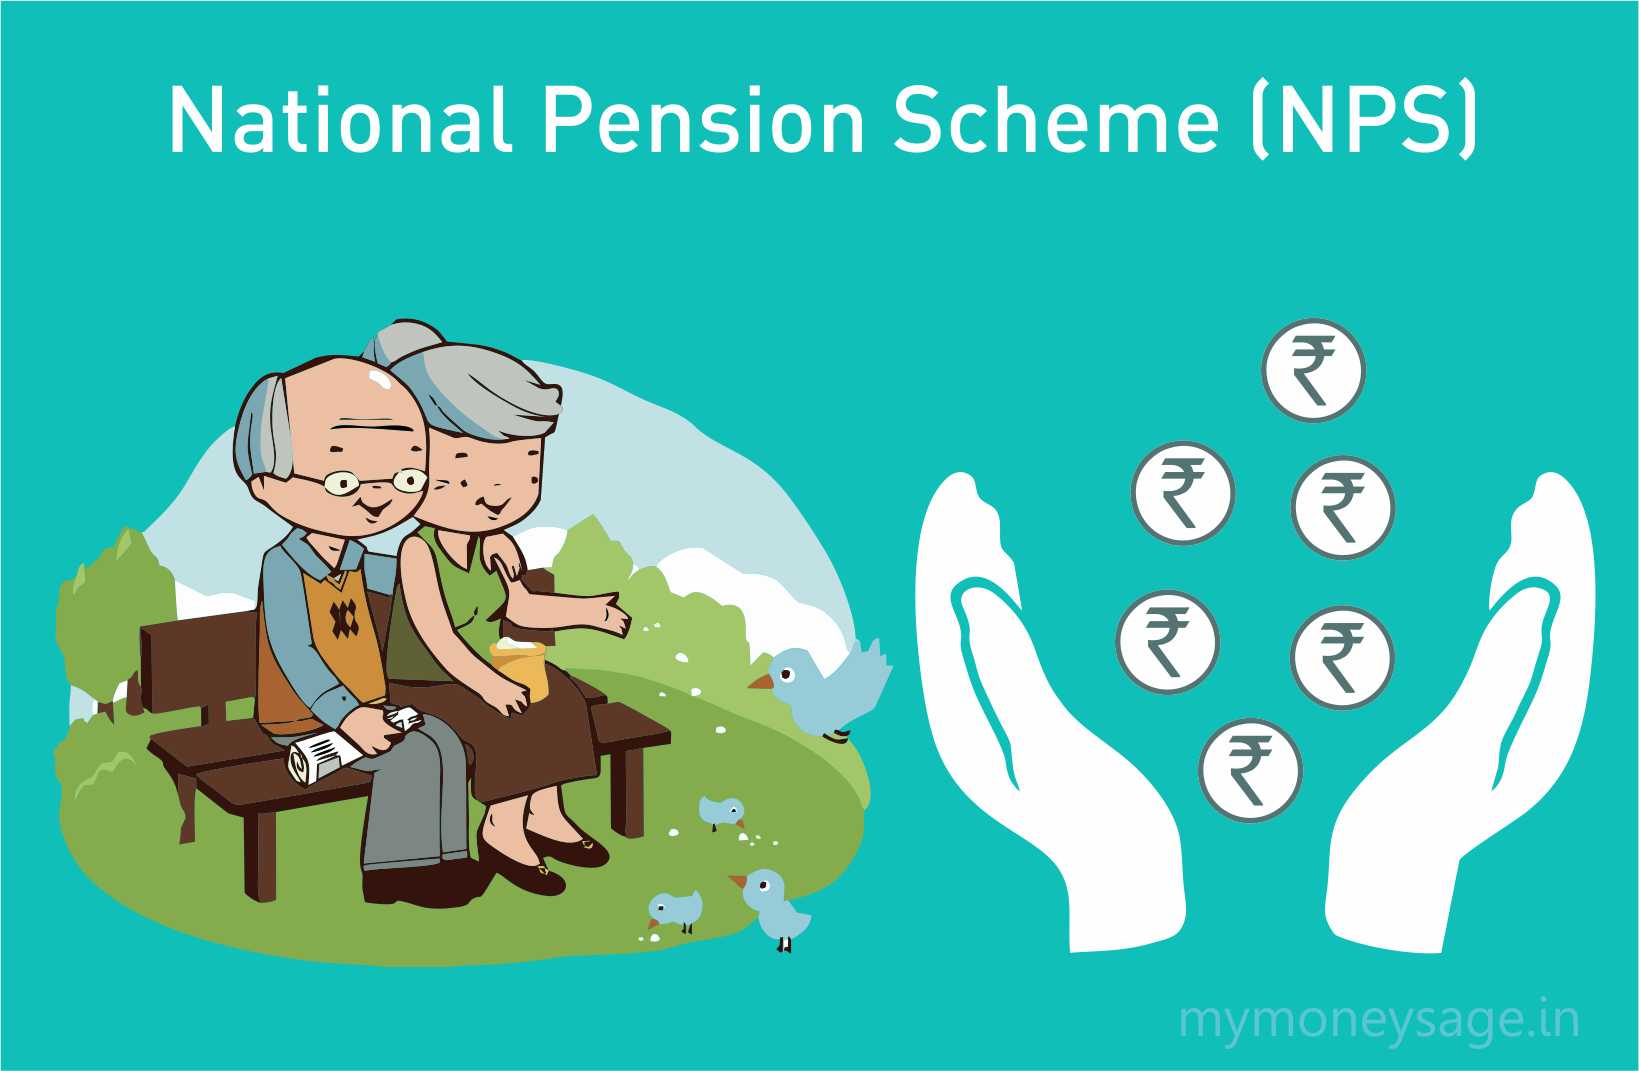 NPS Tier II through Default scheme for Government Sector Subscribers: PFRDA